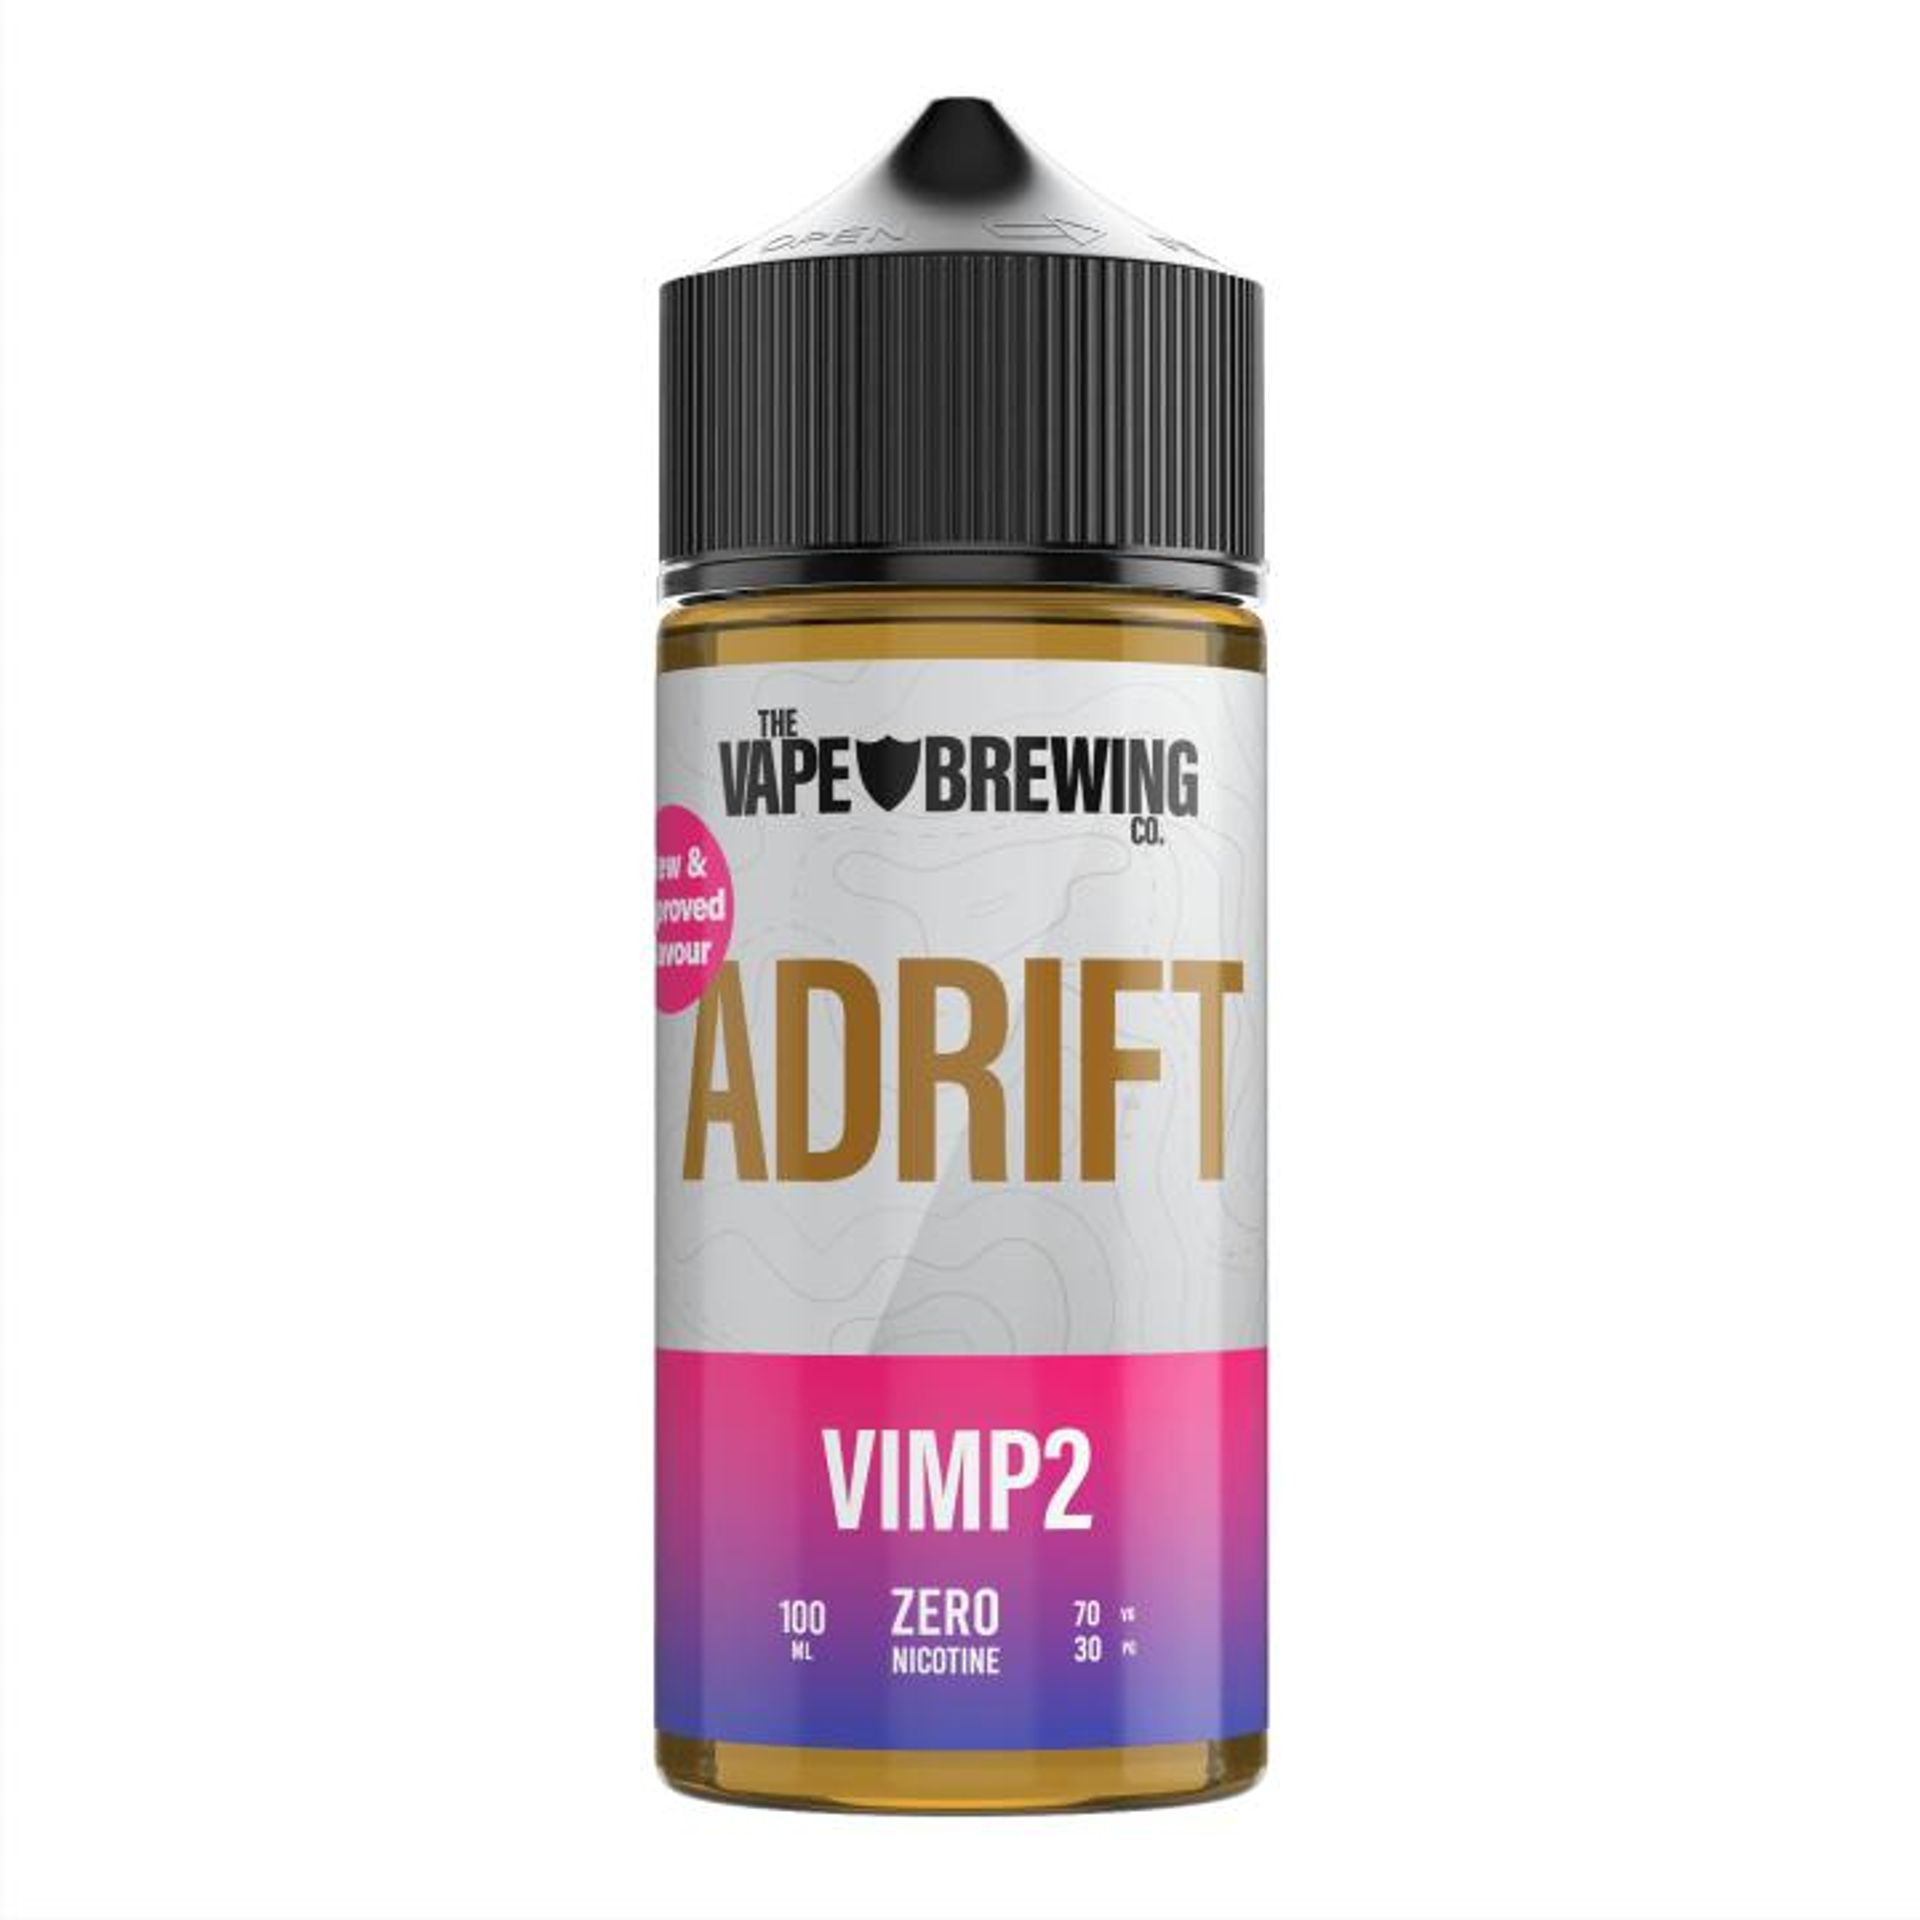 Image of Vimp2 by The Vape Brewing Co